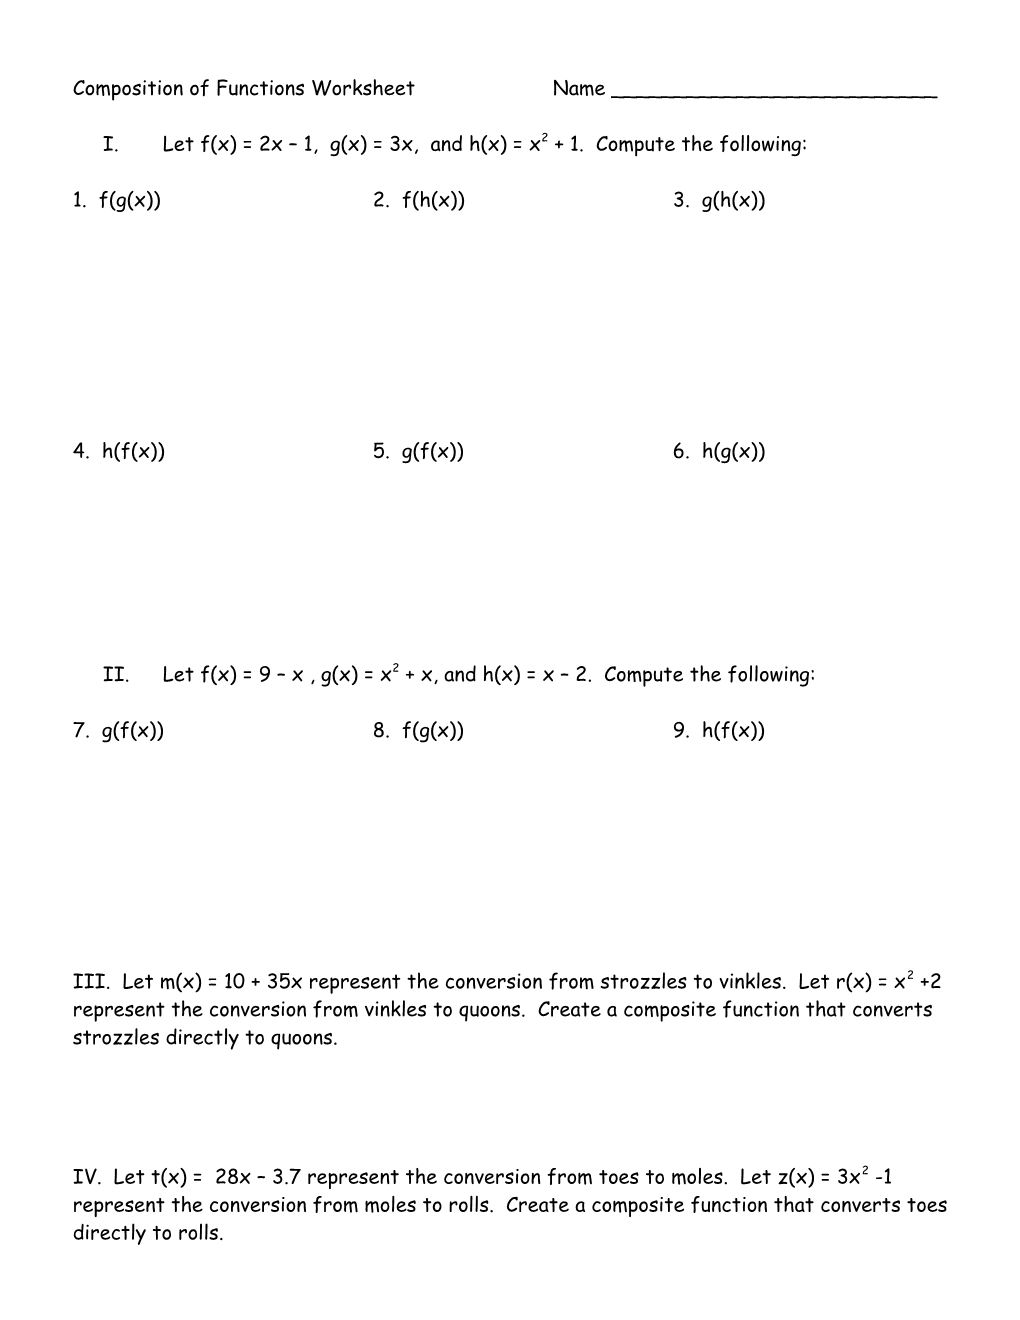 Composition of Functions Worksheet